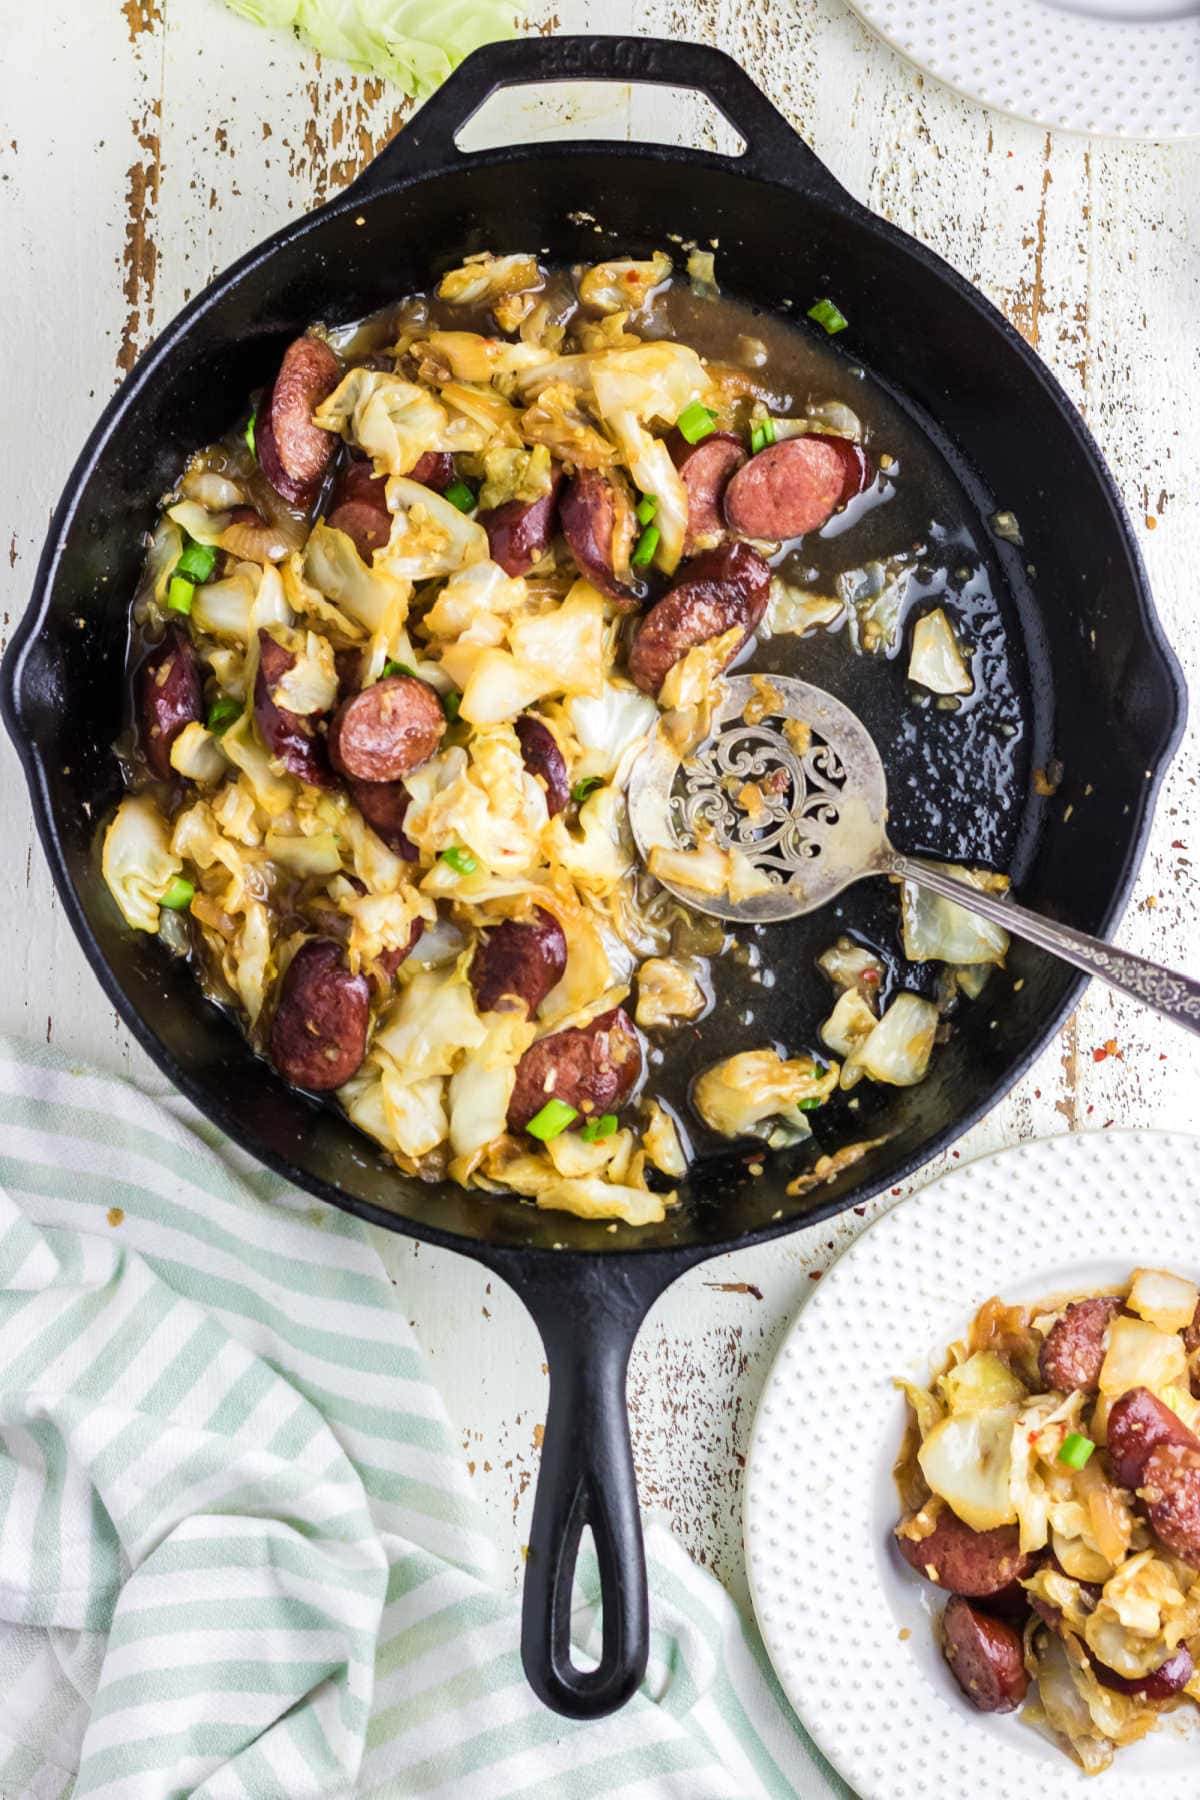 Overhead view of an iron skillet with kielbasa and cabbage.